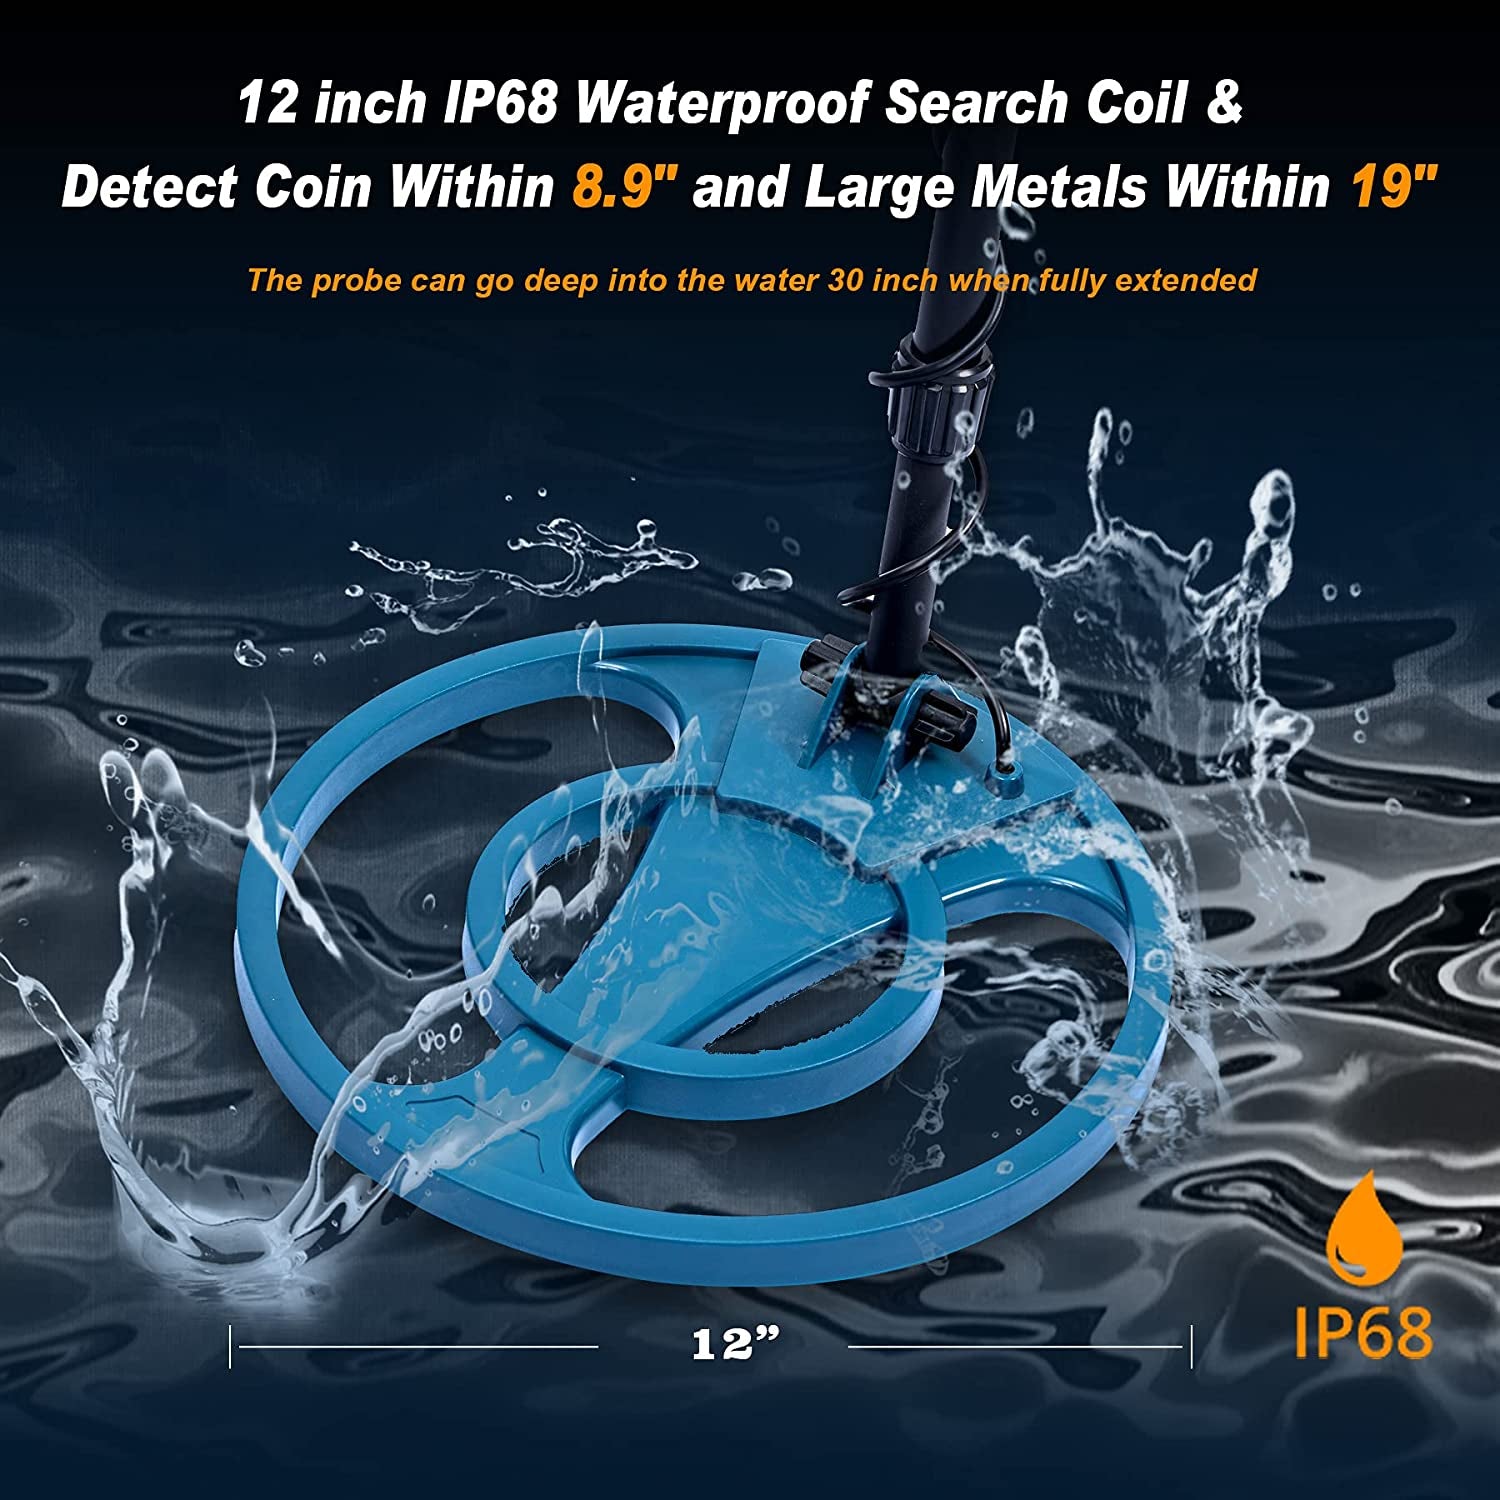 Professional Metal Detector for Adults & Kids Waterproof - 12'' IP68 Waterproof Search Coil, 6 Modes - Professional High Accuracy Gold Detector with LCD Display, Advanced DSP Chip, Tool&Accessories